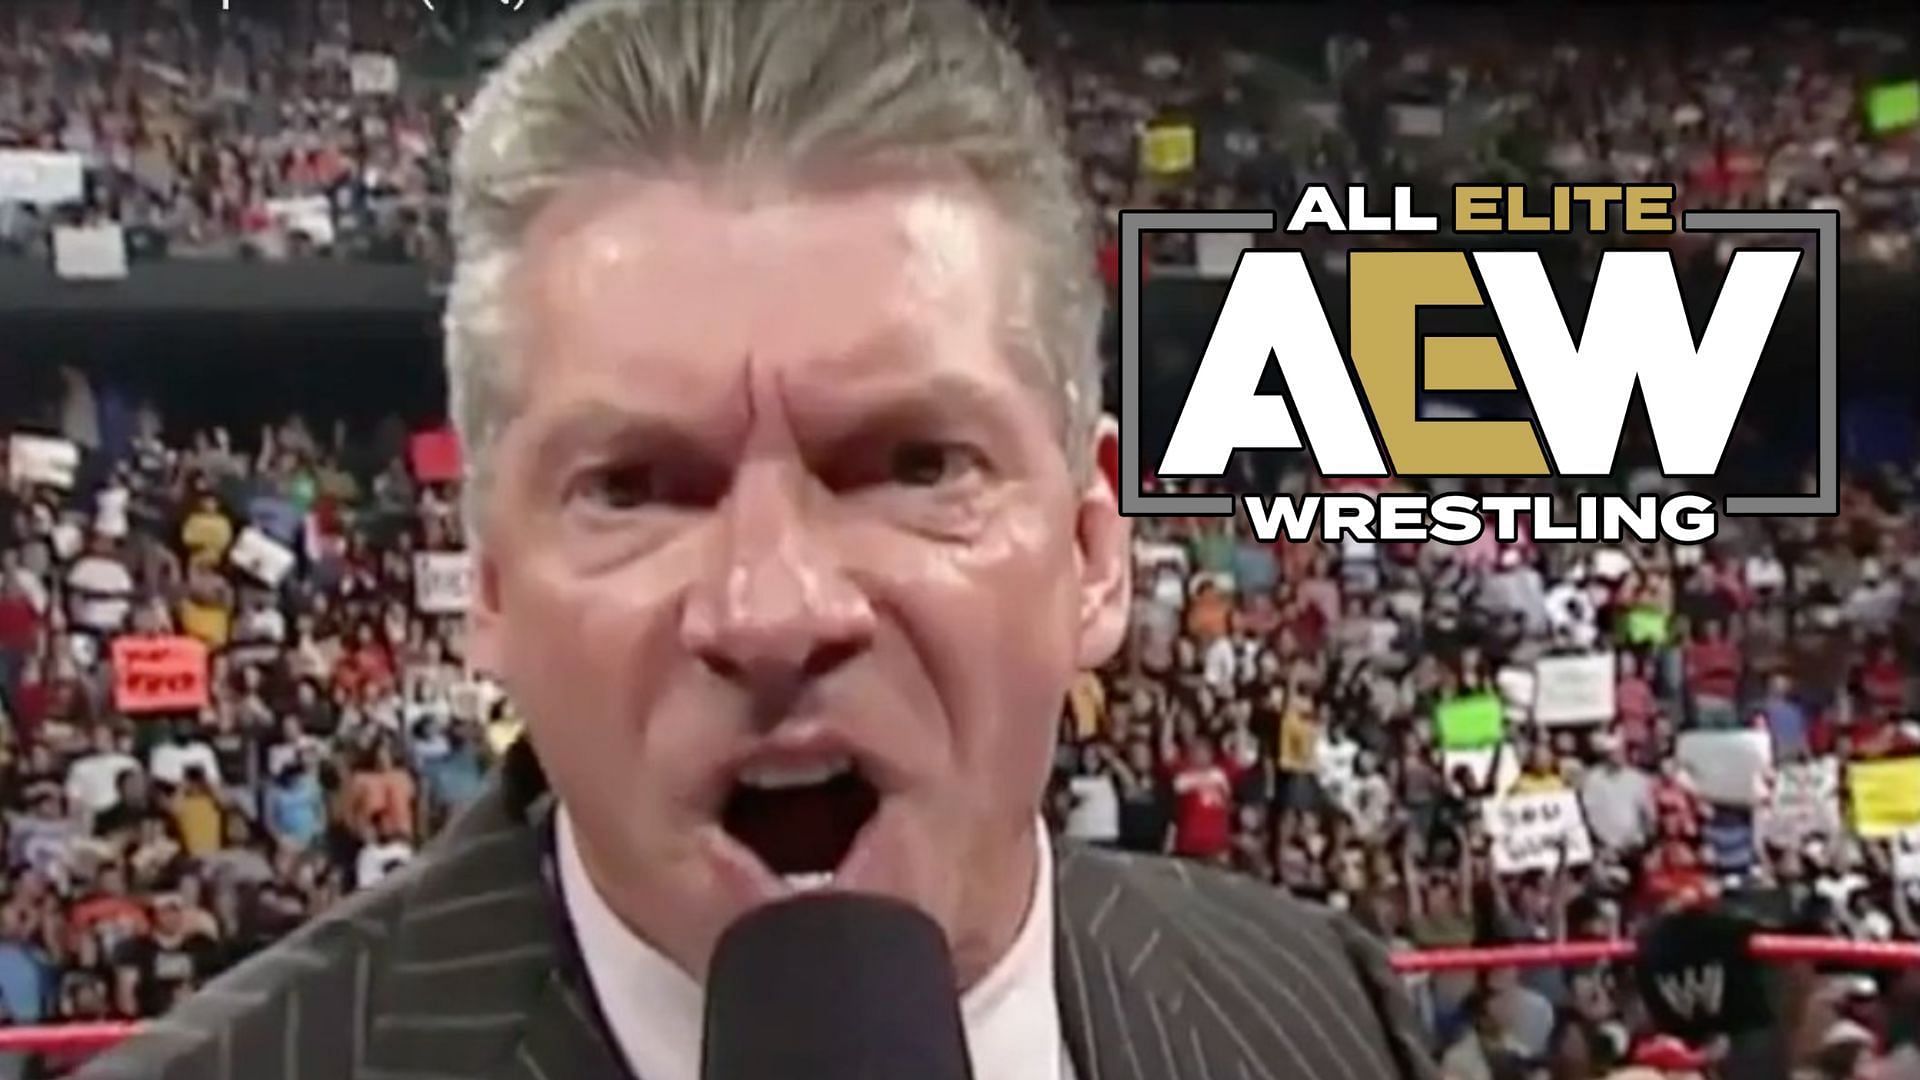 Vince McMahon has a long list of controversial actions.